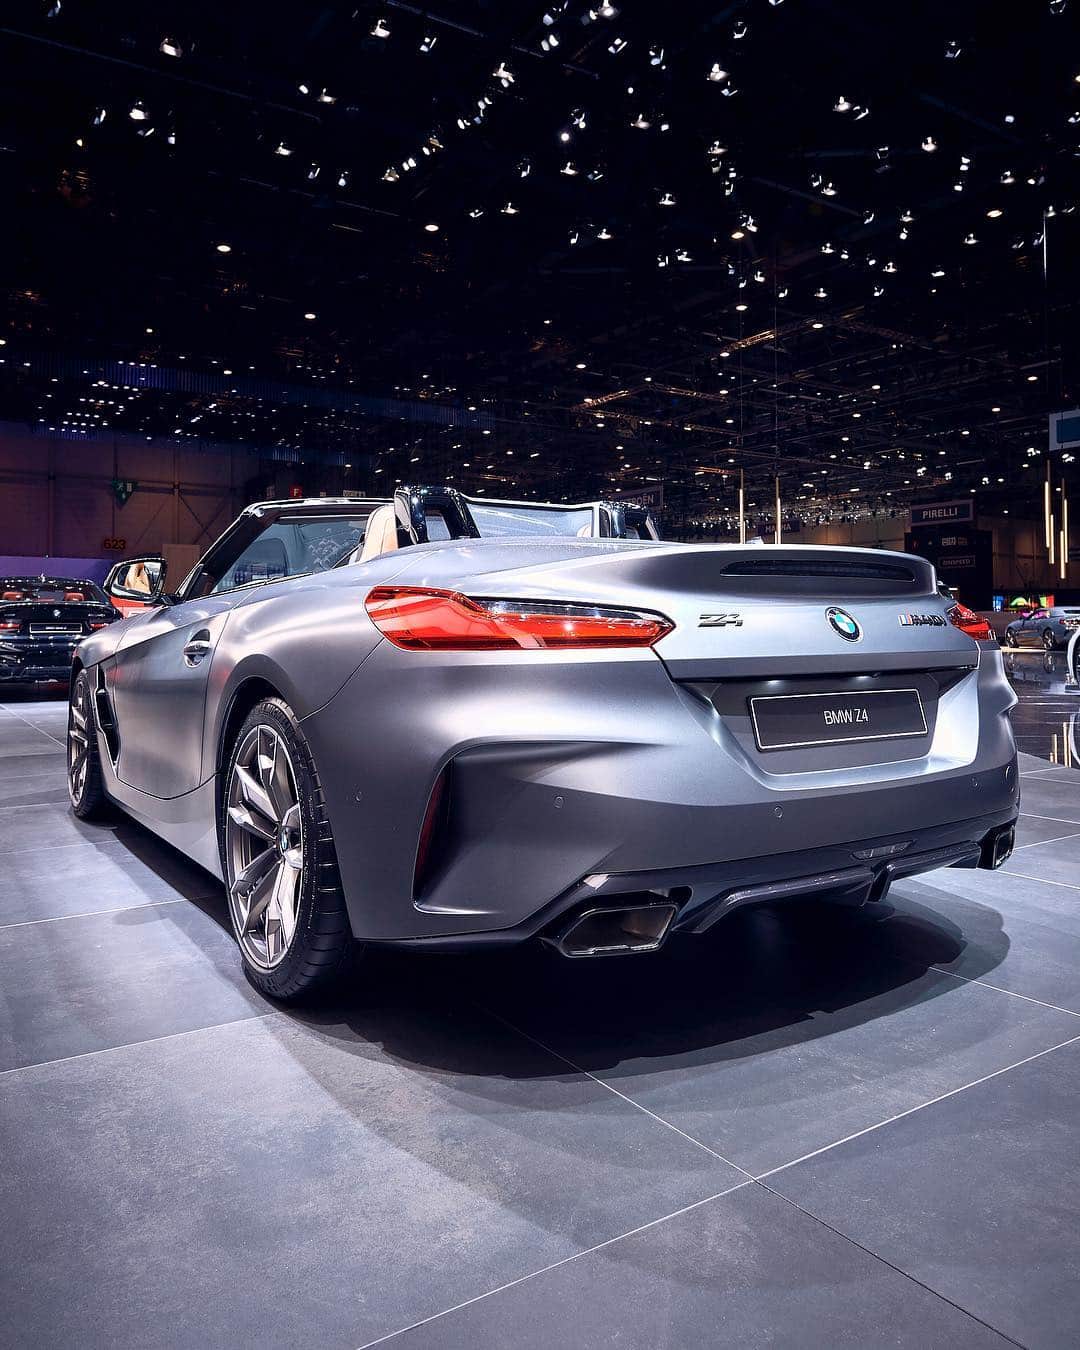 BMWさんのインスタグラム写真 - (BMWInstagram)「As the #GIMSSWISS came to an end hopefully everyone found something pleasing amongst the novelties presented at the show. What was your favorite? #BMW #BMWGIMS __ BMW 330e Sedan: Fuel consumption in l/100 km (combined): from 1.7. CO2 emissions in g/km (combined): from 39.* BMW 530e Sedan: Energy consumption kWh/100 km (combined): 14,1 - 13,1. Fuel consumption in l/100 km (combined): 2.1 - 1.9. CO2 emissions in g/km (combined): 49 - 44. BMW 745e Sedan: Fuel consumption in l/100 km (combined): 2.3; CO2-emissions in g/km (combined): 52 – 48; Energy consumption in kWh/100km (combined): 15.6 – 15.1. BMW X5 xDrive45e: Fuel consumption in l/100 km (combined): 2.1*. Power consumption in kWh/100 km (combined): 23.0*. CO2 emissions in g/km (combined): 49*, exhaust standard: EU6d-TEMP.  BMW Z4 M40i: fuel consumption (combined): 7.4-7.1 l/100 km; CO2 emissions (combined): 168-162 g/km* BMW M2 Competition: Fuel consumption in l/100 km (combined): 9.8 - 9.0. CO2 emissions (combined) in g/km: 224 - 206. *All performance, fuel consumption and emissions figures are provisional.  The values of fuel consumptions, CO2 emissions and energy consumptions shown were determined according to the European Regulation (EC) 715/2007 in the version applicable at the time of type approval. The figures refer to a vehicle with basic configuration in Germany and the range shown considers optional equipment and the different size of wheels and tires available on the selected model. The values are already based on the new WLTP regulation and are translated back into NEDC-equivalent values in order to ensure the comparison between the vehicles. [With respect to these vehicles, for vehicle related taxes or other duties based (at least inter alia) on CO2-emissions the CO2 values may differ to the values stated here.] The CO2 efficiency specifications are determined according to Directive 1999/94/EC and the European Regulation in its current version applicable. The values shown are based on the fuel consumption, CO2 values and energy consumptions according to the NEDC cycle for the classification. For further information about the official fuel consumption and the specific CO2 emission of new passenger」3月18日 6時36分 - bmw